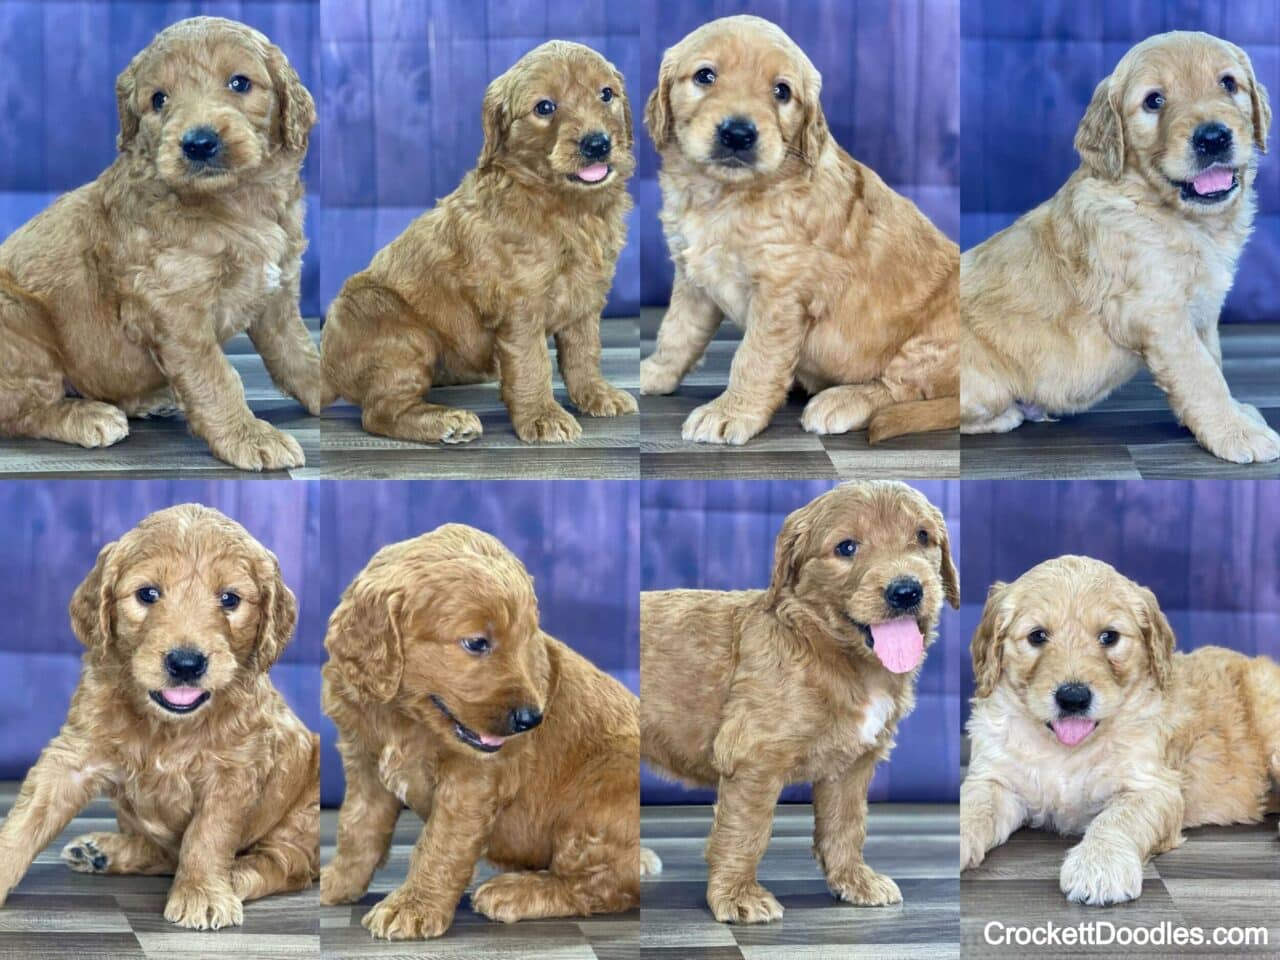 These first generation standard Goldendoodles have a less-curly look and more of the Golden Retriever appearance